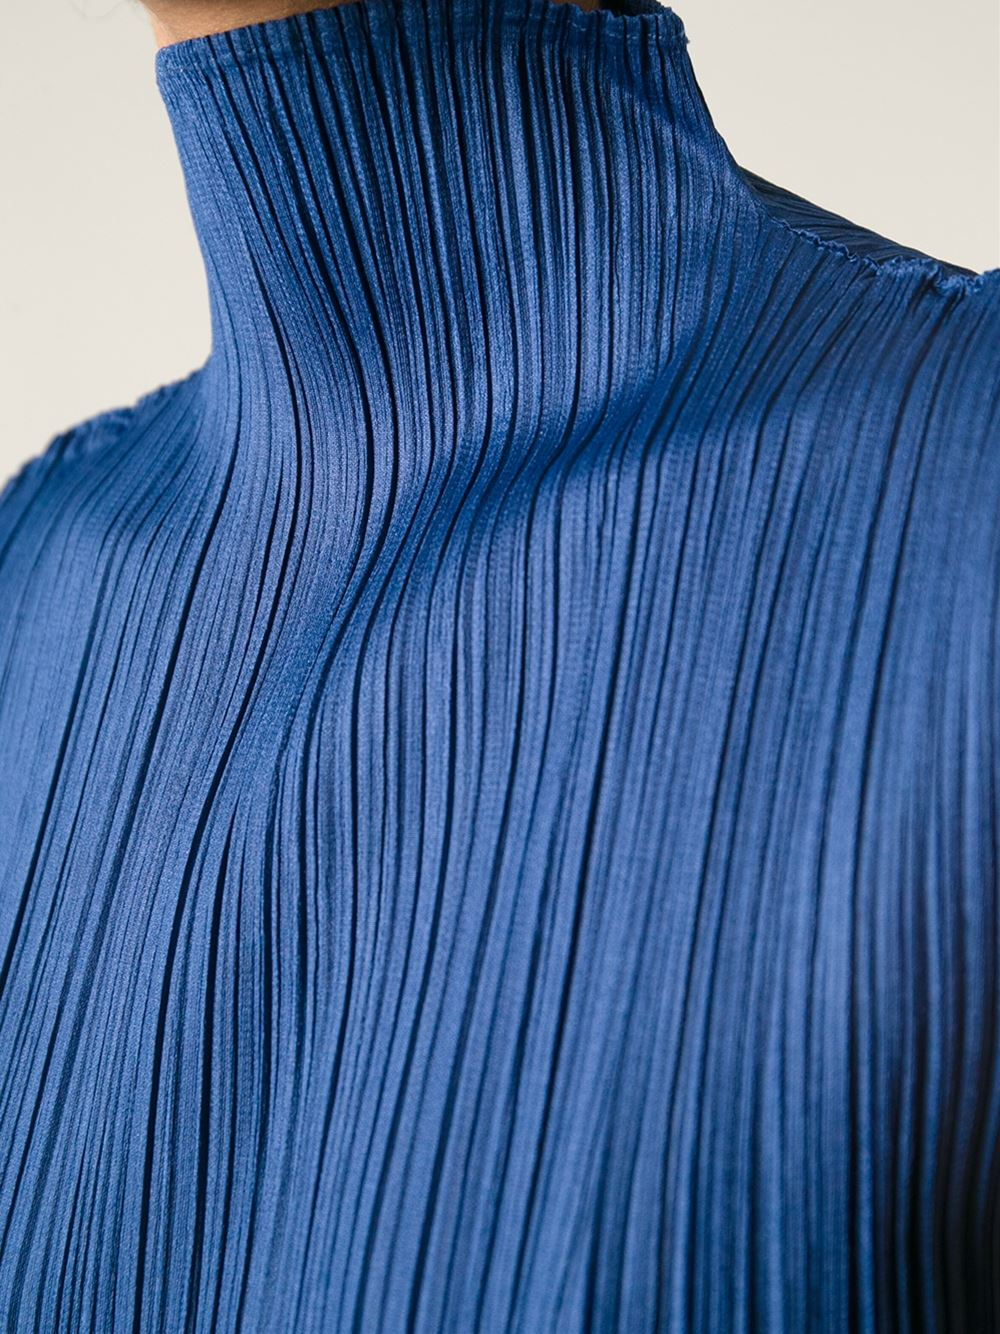 pleats-please-by-issey-miyake-vintage-blue-turtle-neck-sleeveless-top ...